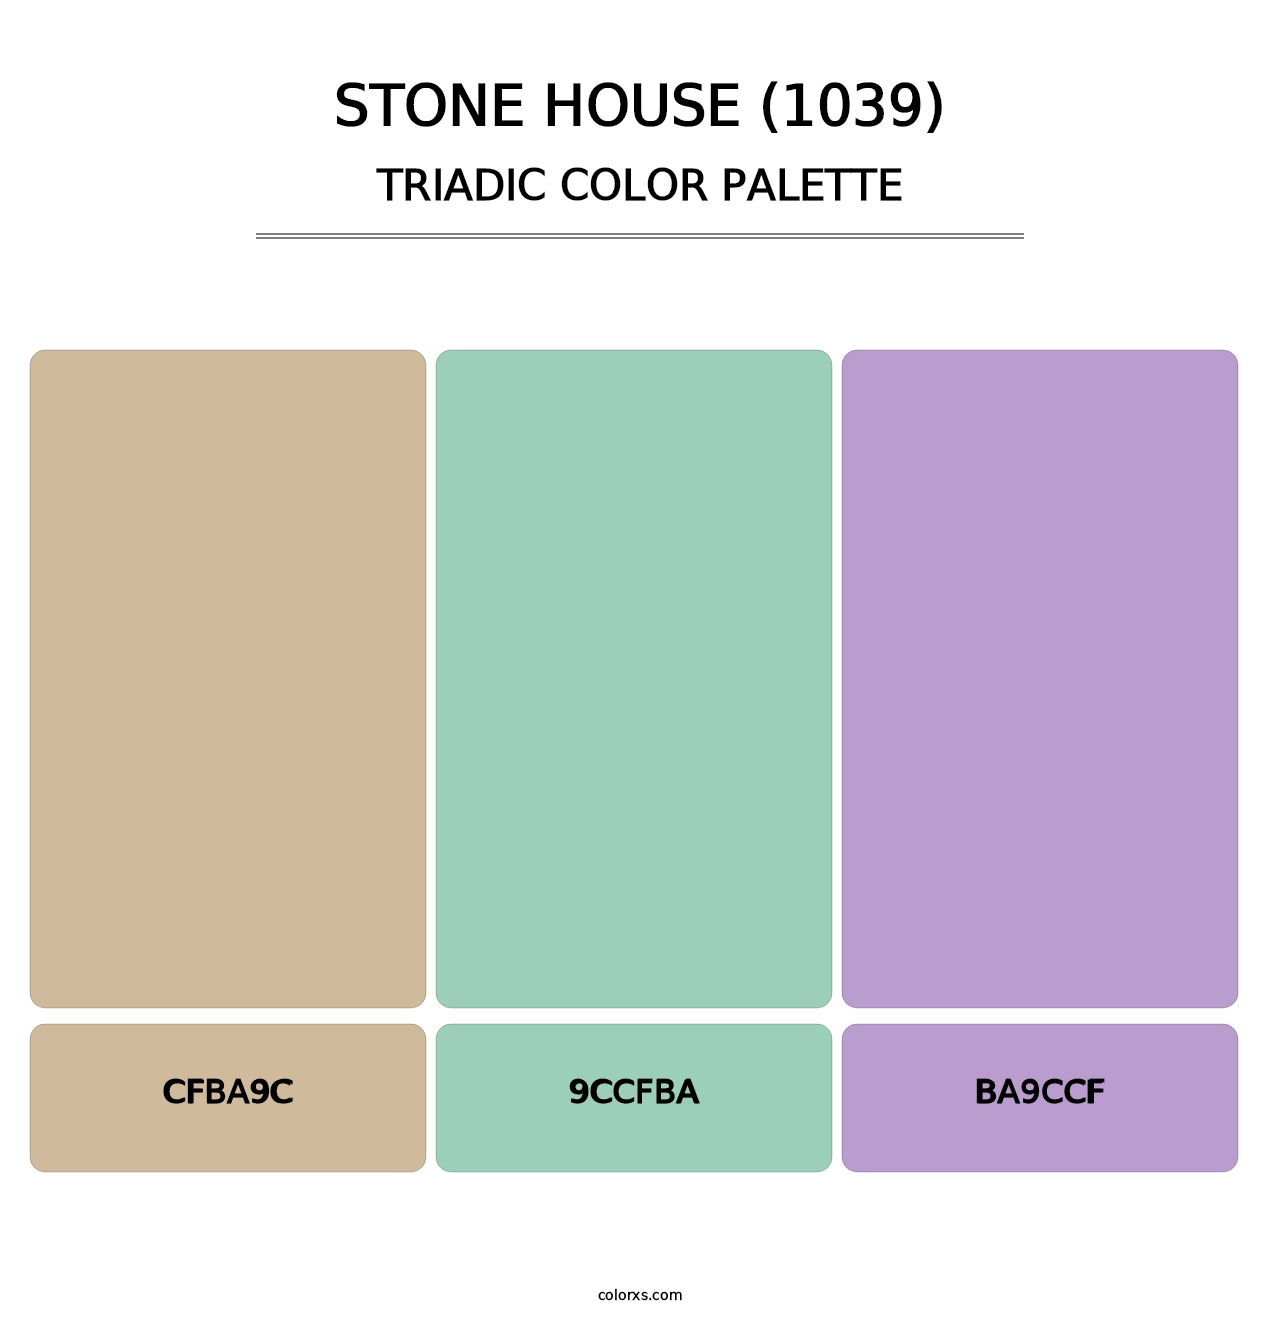 Stone House (1039) - Triadic Color Palette